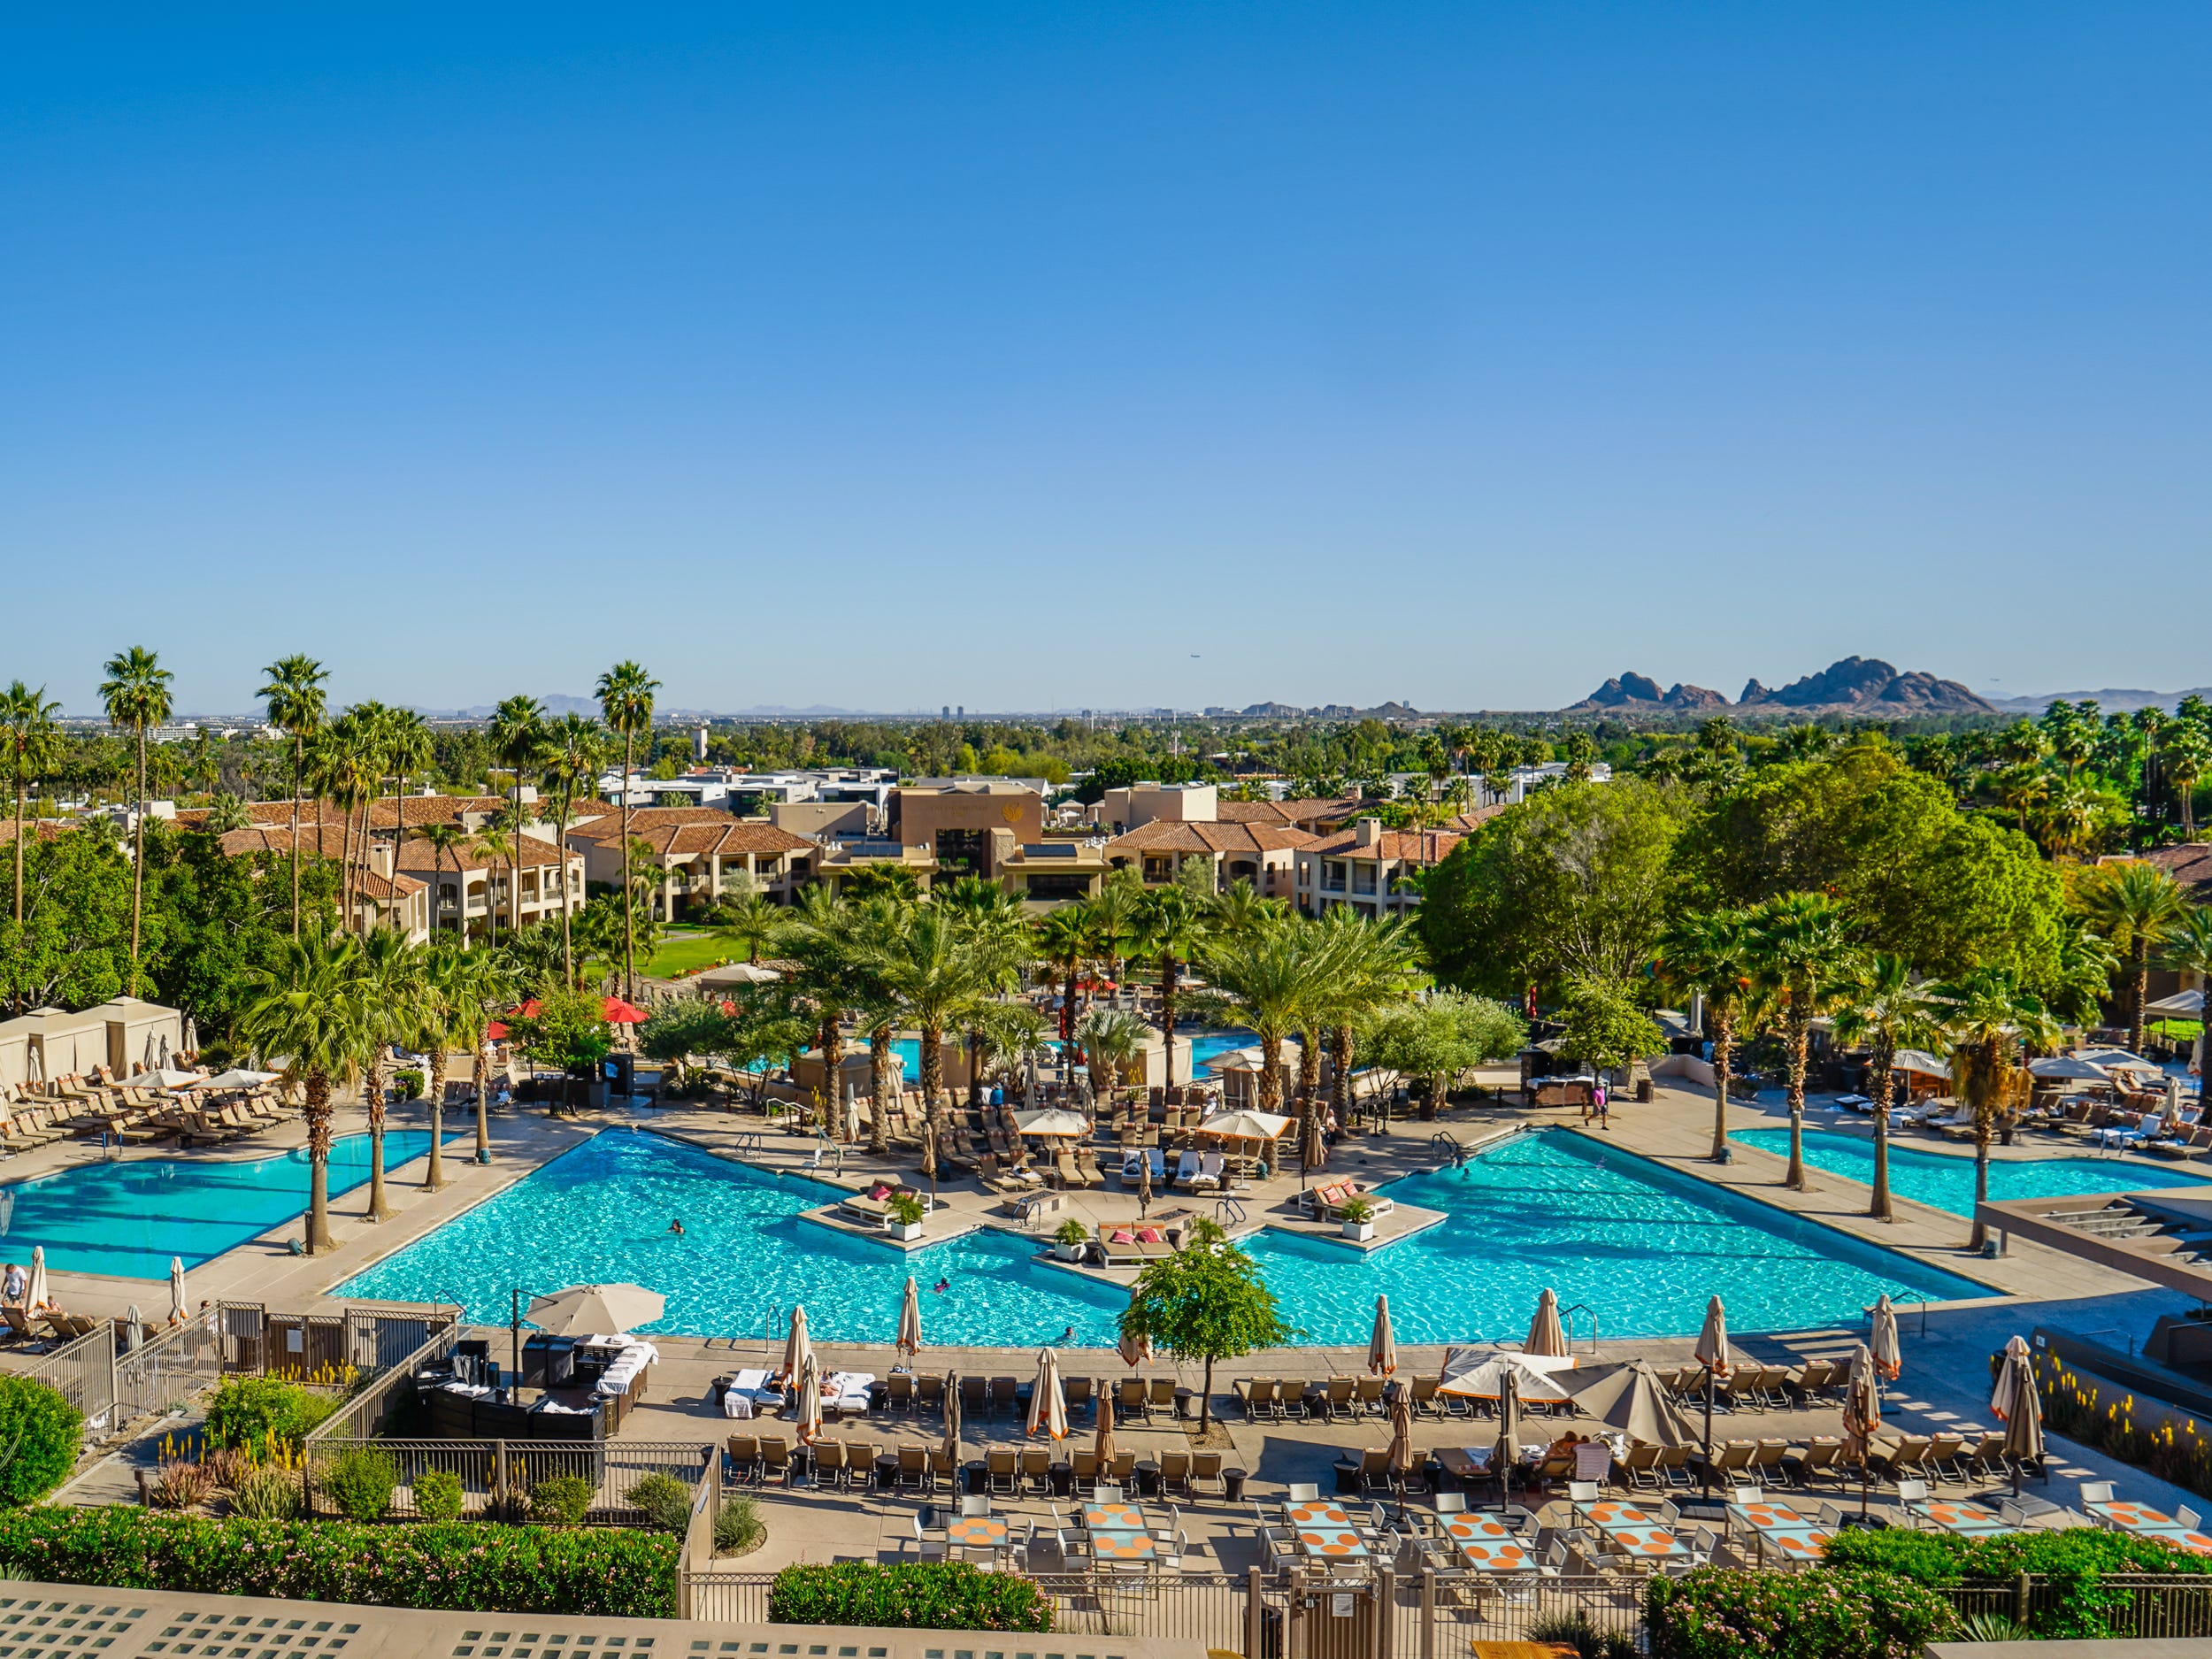 <p>My stay at the Phoenician screamed luxury from the start. </p><p>As my cab entered the 600-acre property's winding road, I spotted giant fountains, sculptures, and an 18-hole golf course. I had to confirm my reservation with a security guard before we got to the main building, which made the resort feel exclusive.</p><p>In addition to the 645 rooms, the <a rel="" href="https://www.businessinsider.com/photos-evermore-orlando-luxury-beach-resort-big-groups-2024-3">mega-resort</a> had every amenity to make tourists feel like VIPs, from a five-star spa to luxury car rentals.</p><p>The <a rel="" href="https://markets.businessinsider.com/news/stocks/marriott-international-expects-to-introduce-more-than-35-luxury-hotels-around-the-world-in-2023-1031957992">luxury Marriott Hotel</a> also had five pools — one for adults only — and an athletic club with tennis, pickleball, and basketball courts.</p><p>There were so many high-end activities and experiences that I thought affluent tourists could spend an entire vacation just at the resort and have a lavish time.</p>